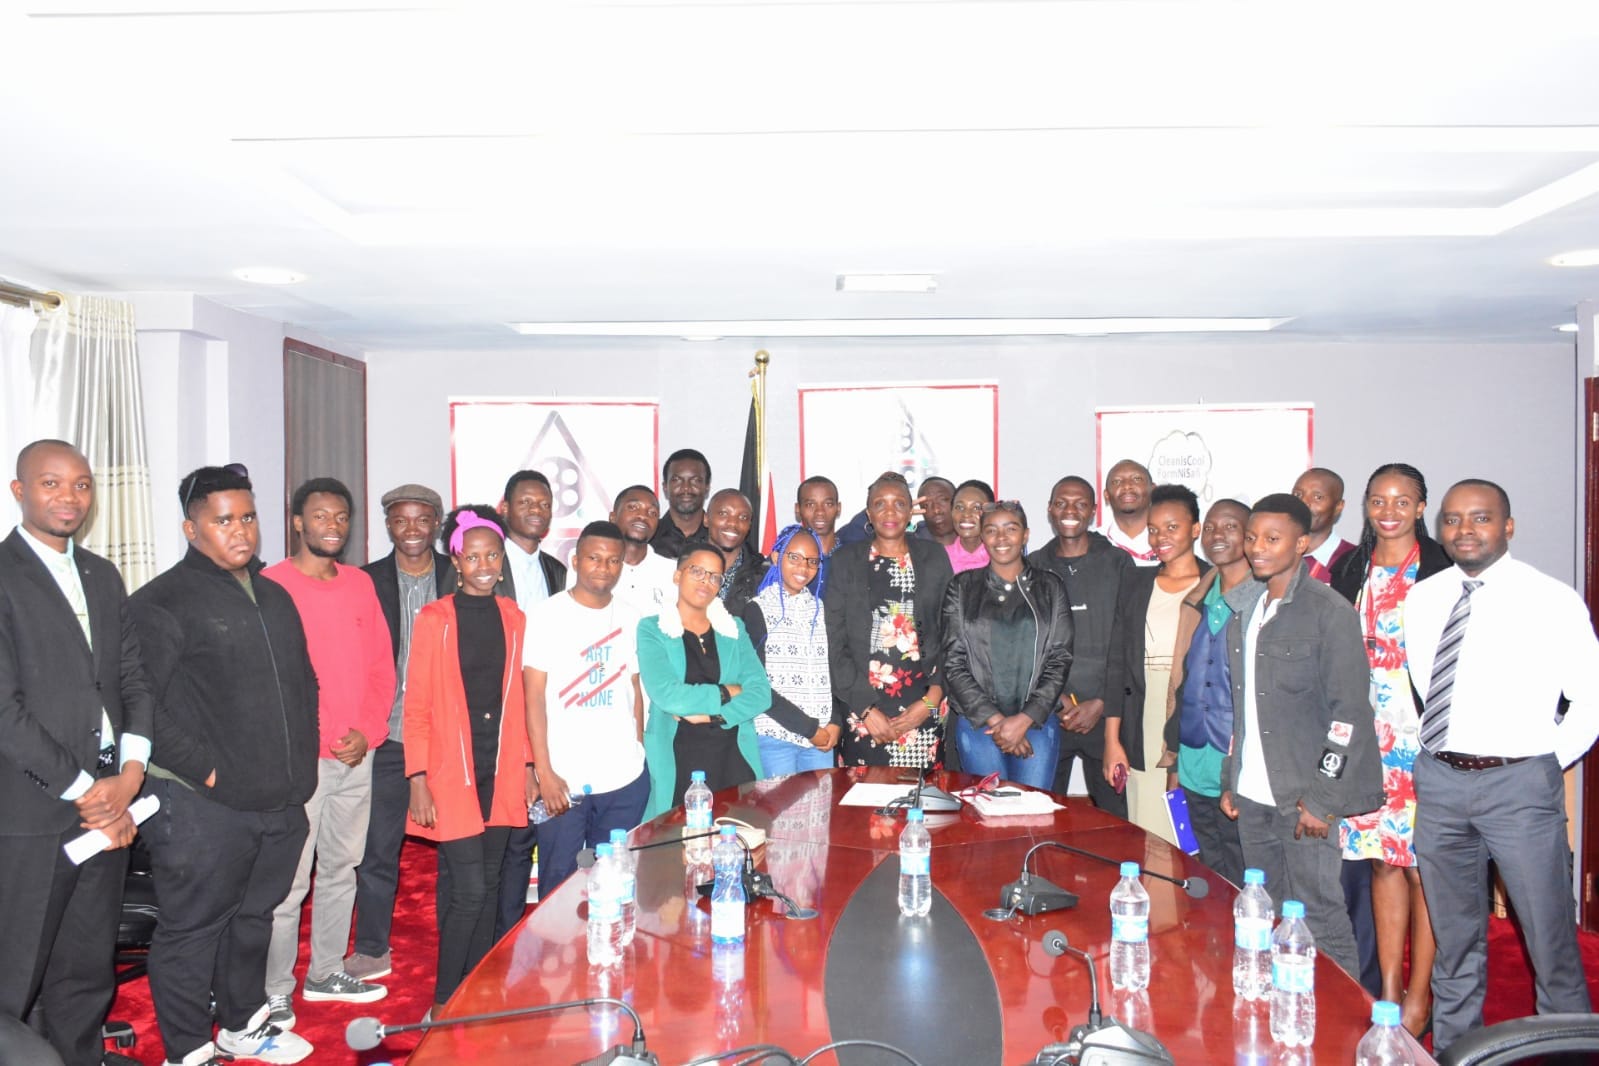 Educational Visit by the Mombasa Aviation Institute - Media and Communication Students